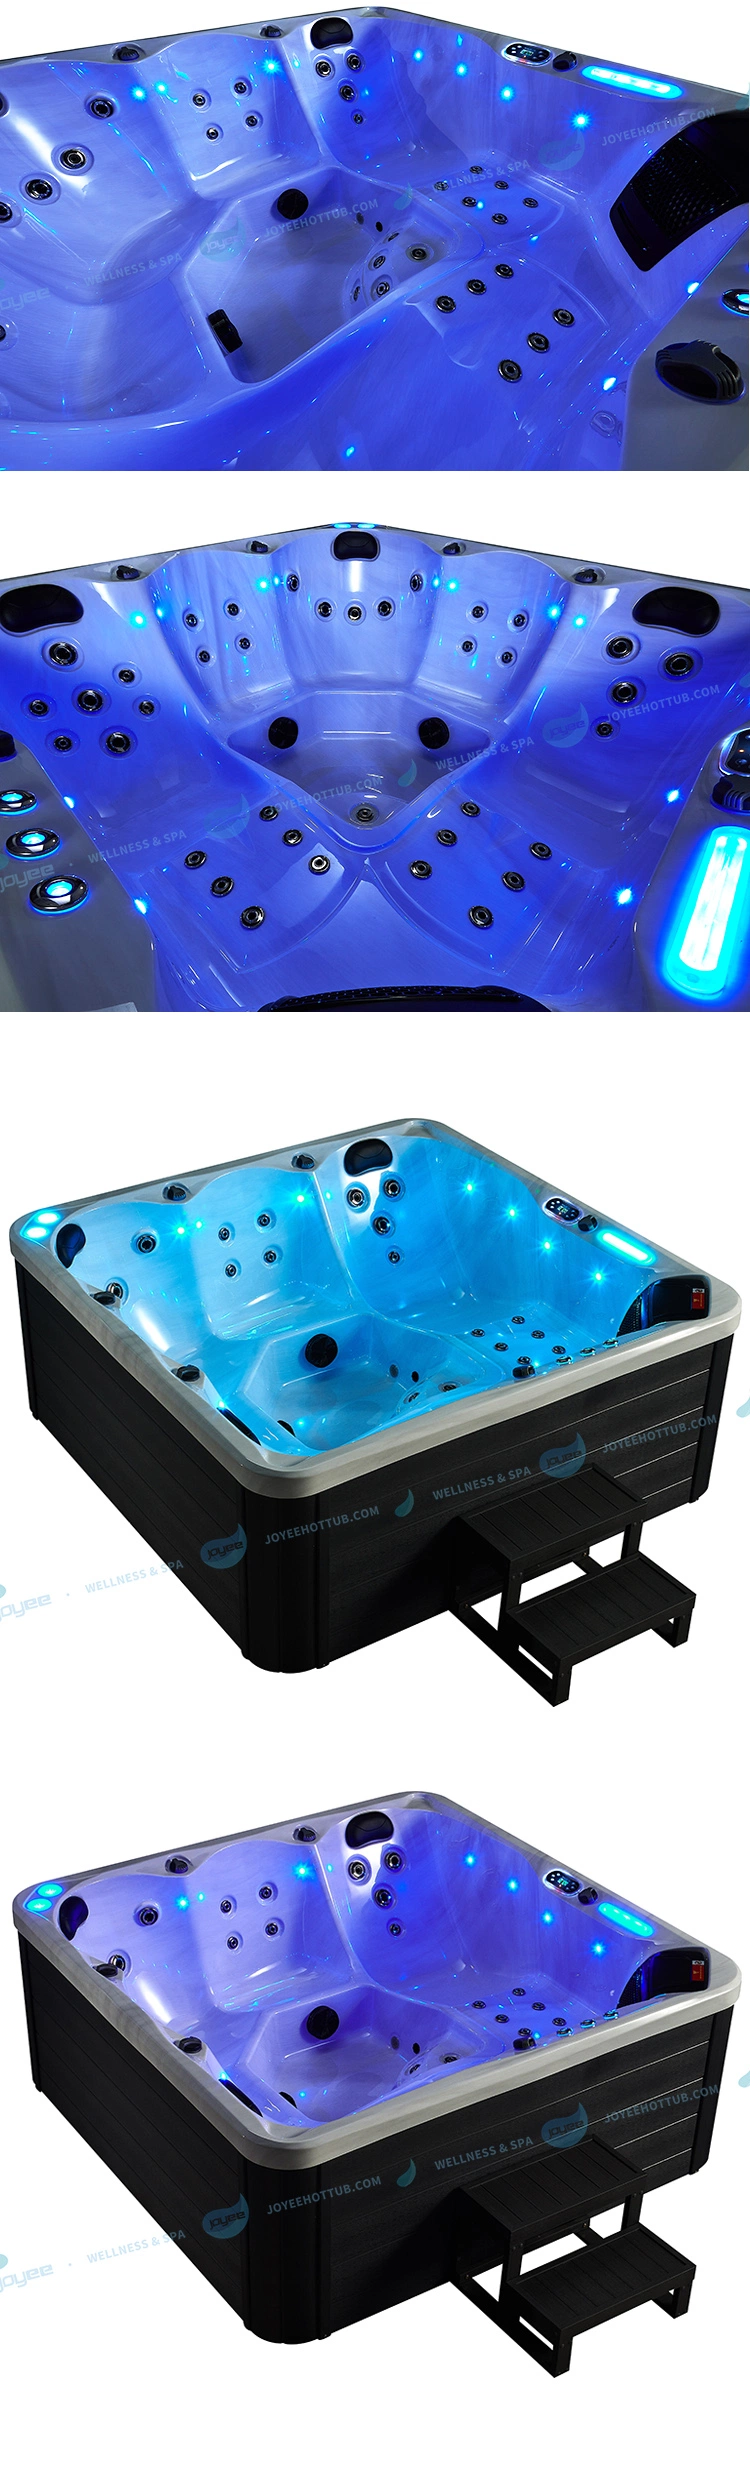 Freestanding Outdoor SPA Whirlpool Hydro Massage Hot Tub with LED Lights Joyee